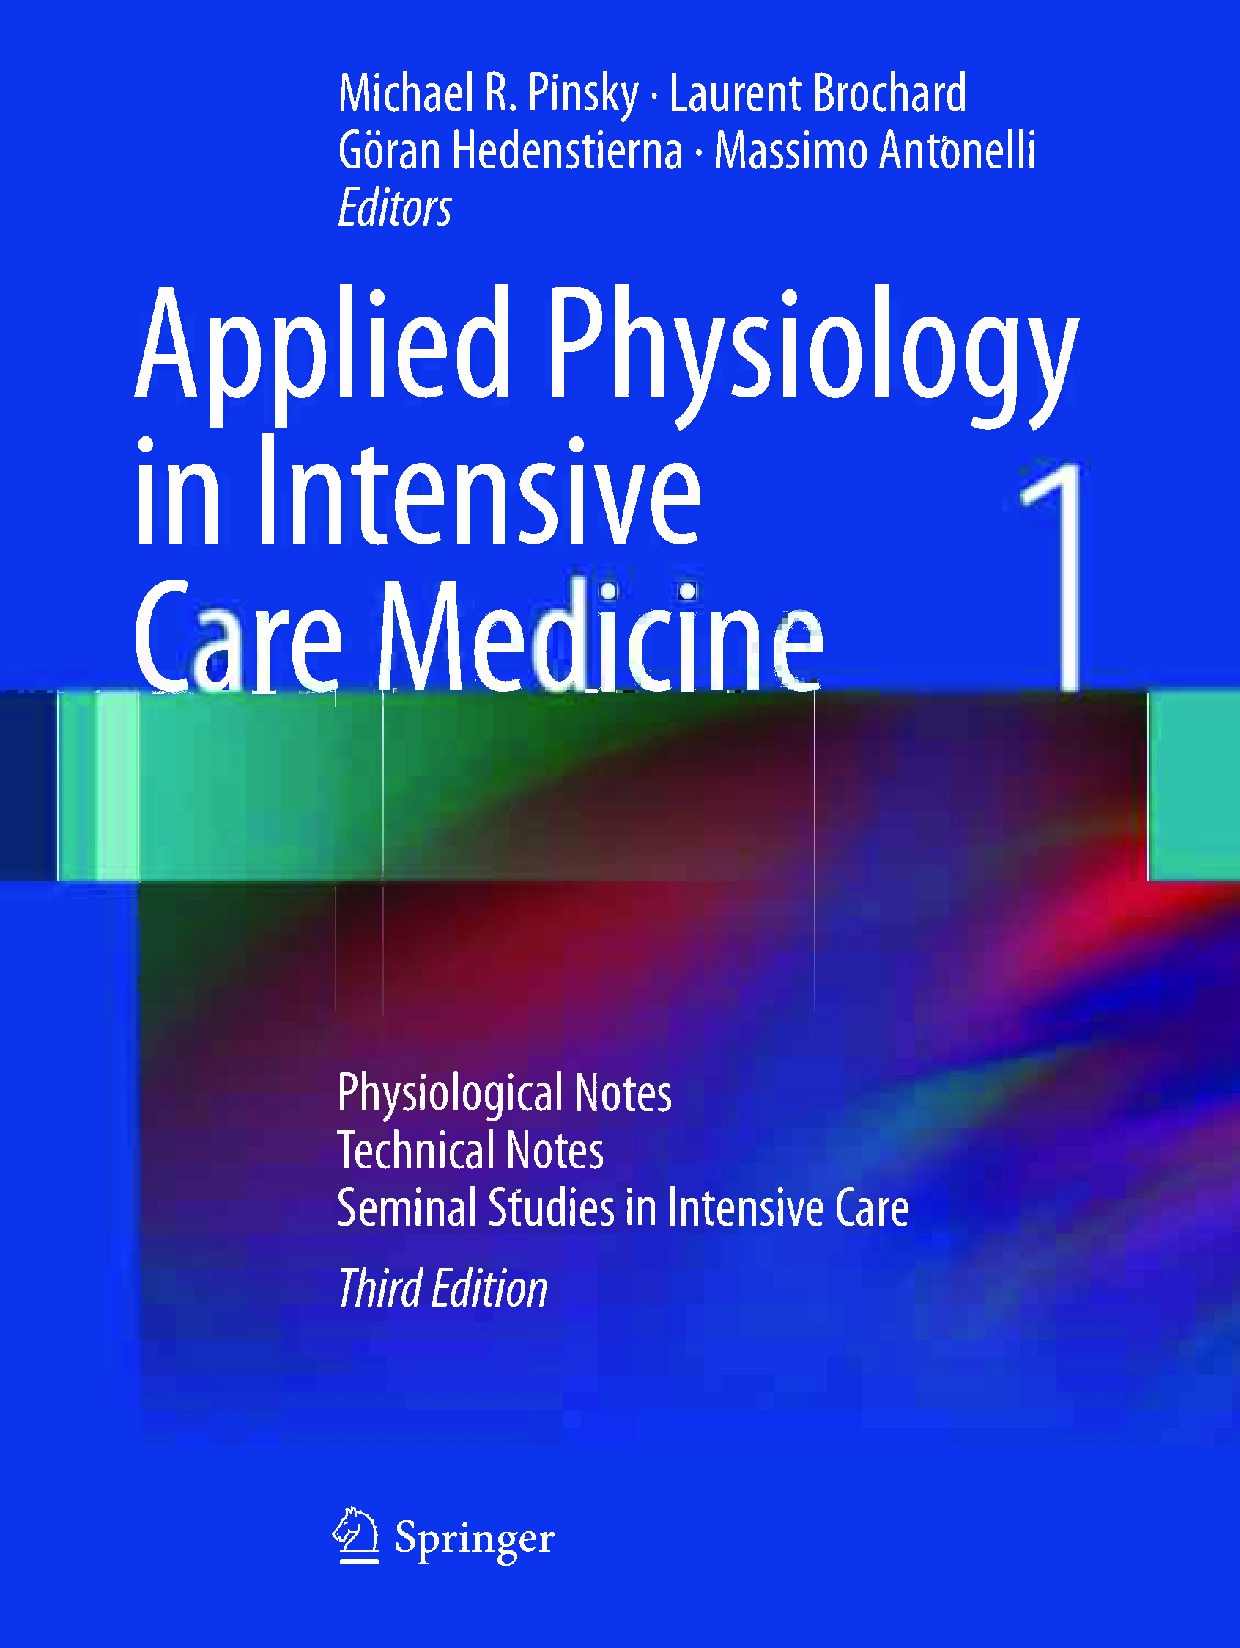 Applied Physiology in Intensive Care Medicine 2012